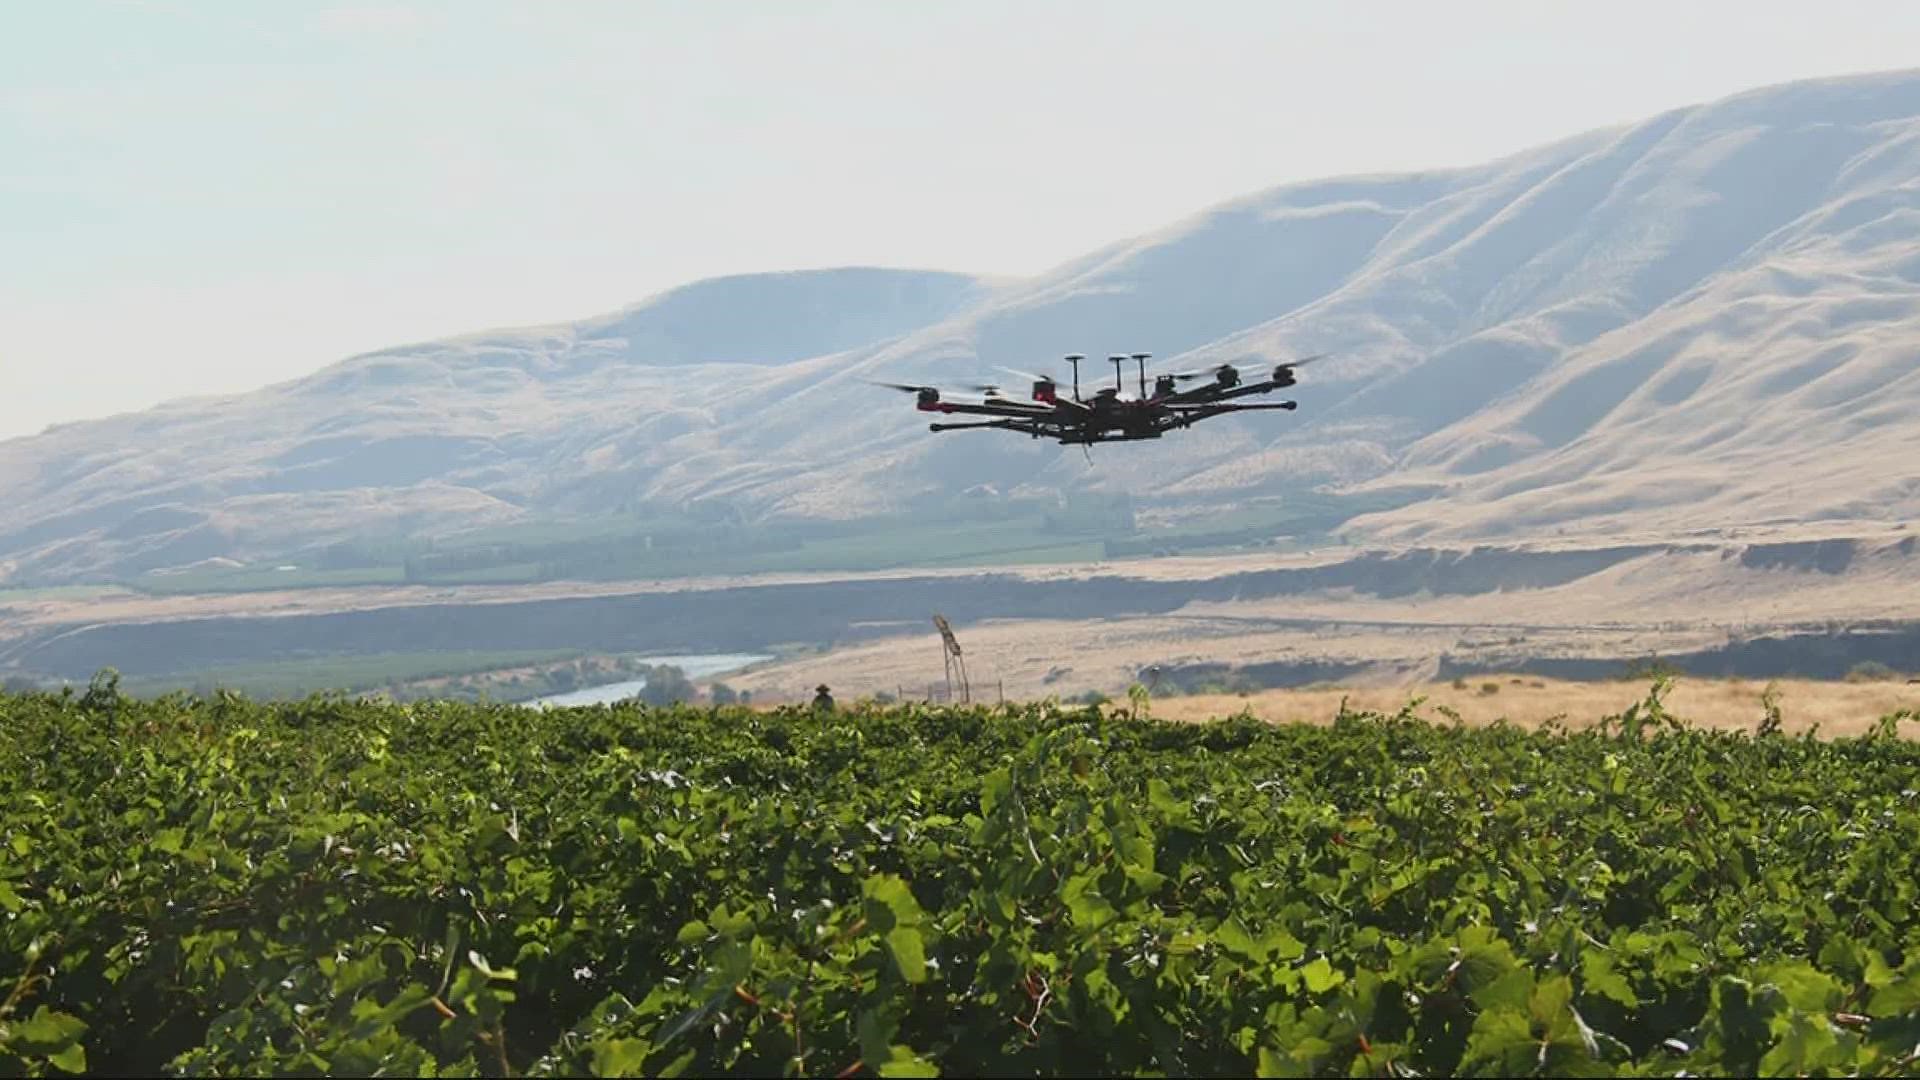 Birds are perennial nuisance for Oregon and Washington grape-growers. A WSU research team says they’ve found a high-tech solution.